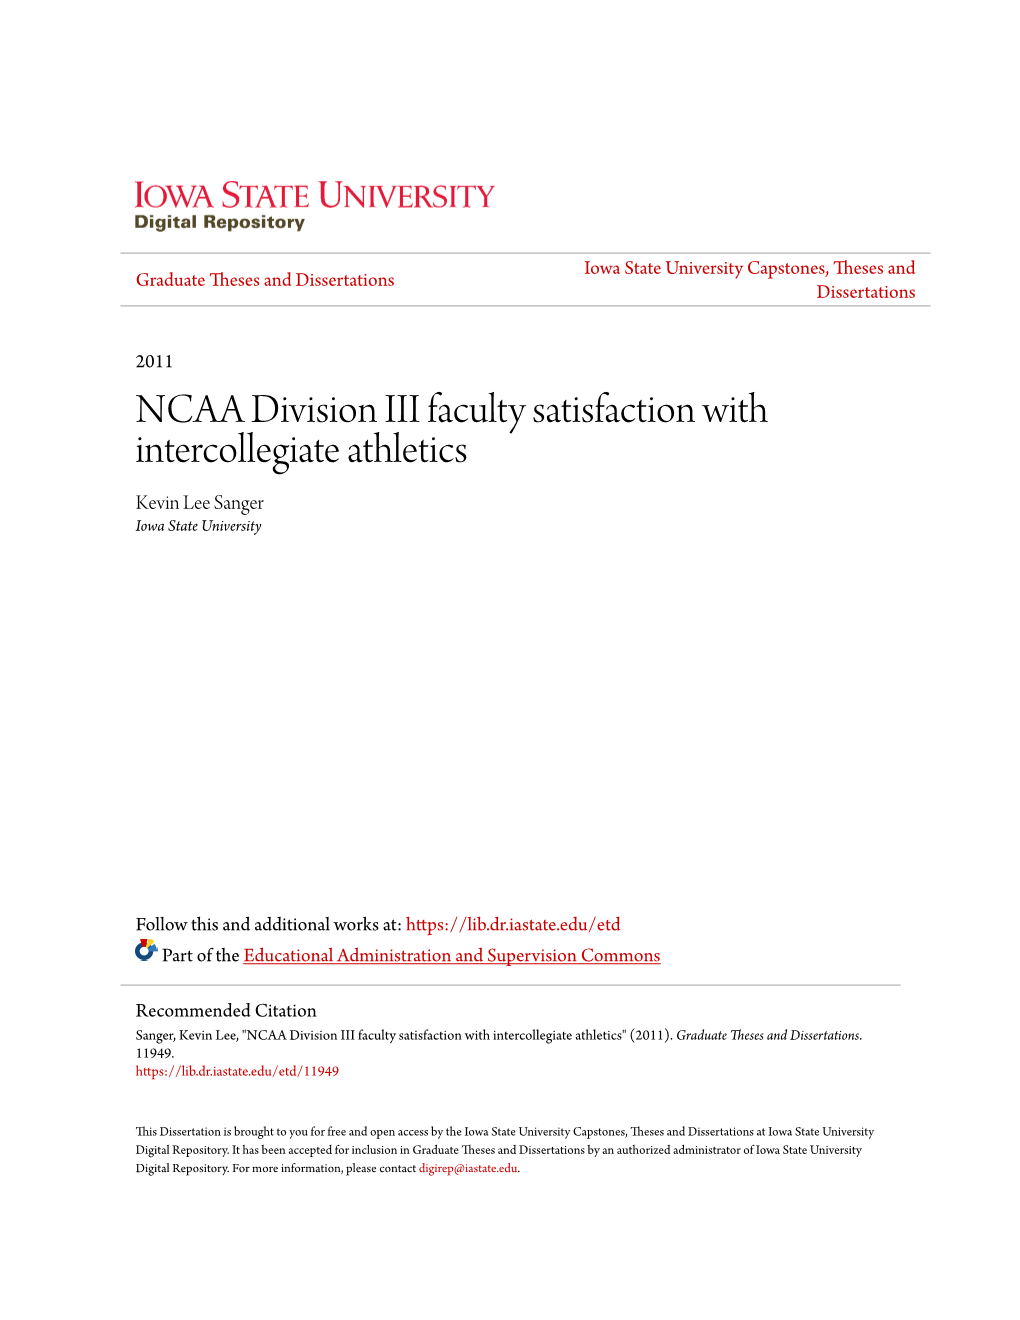 NCAA Division III Faculty Satisfaction with Intercollegiate Athletics Kevin Lee Sanger Iowa State University